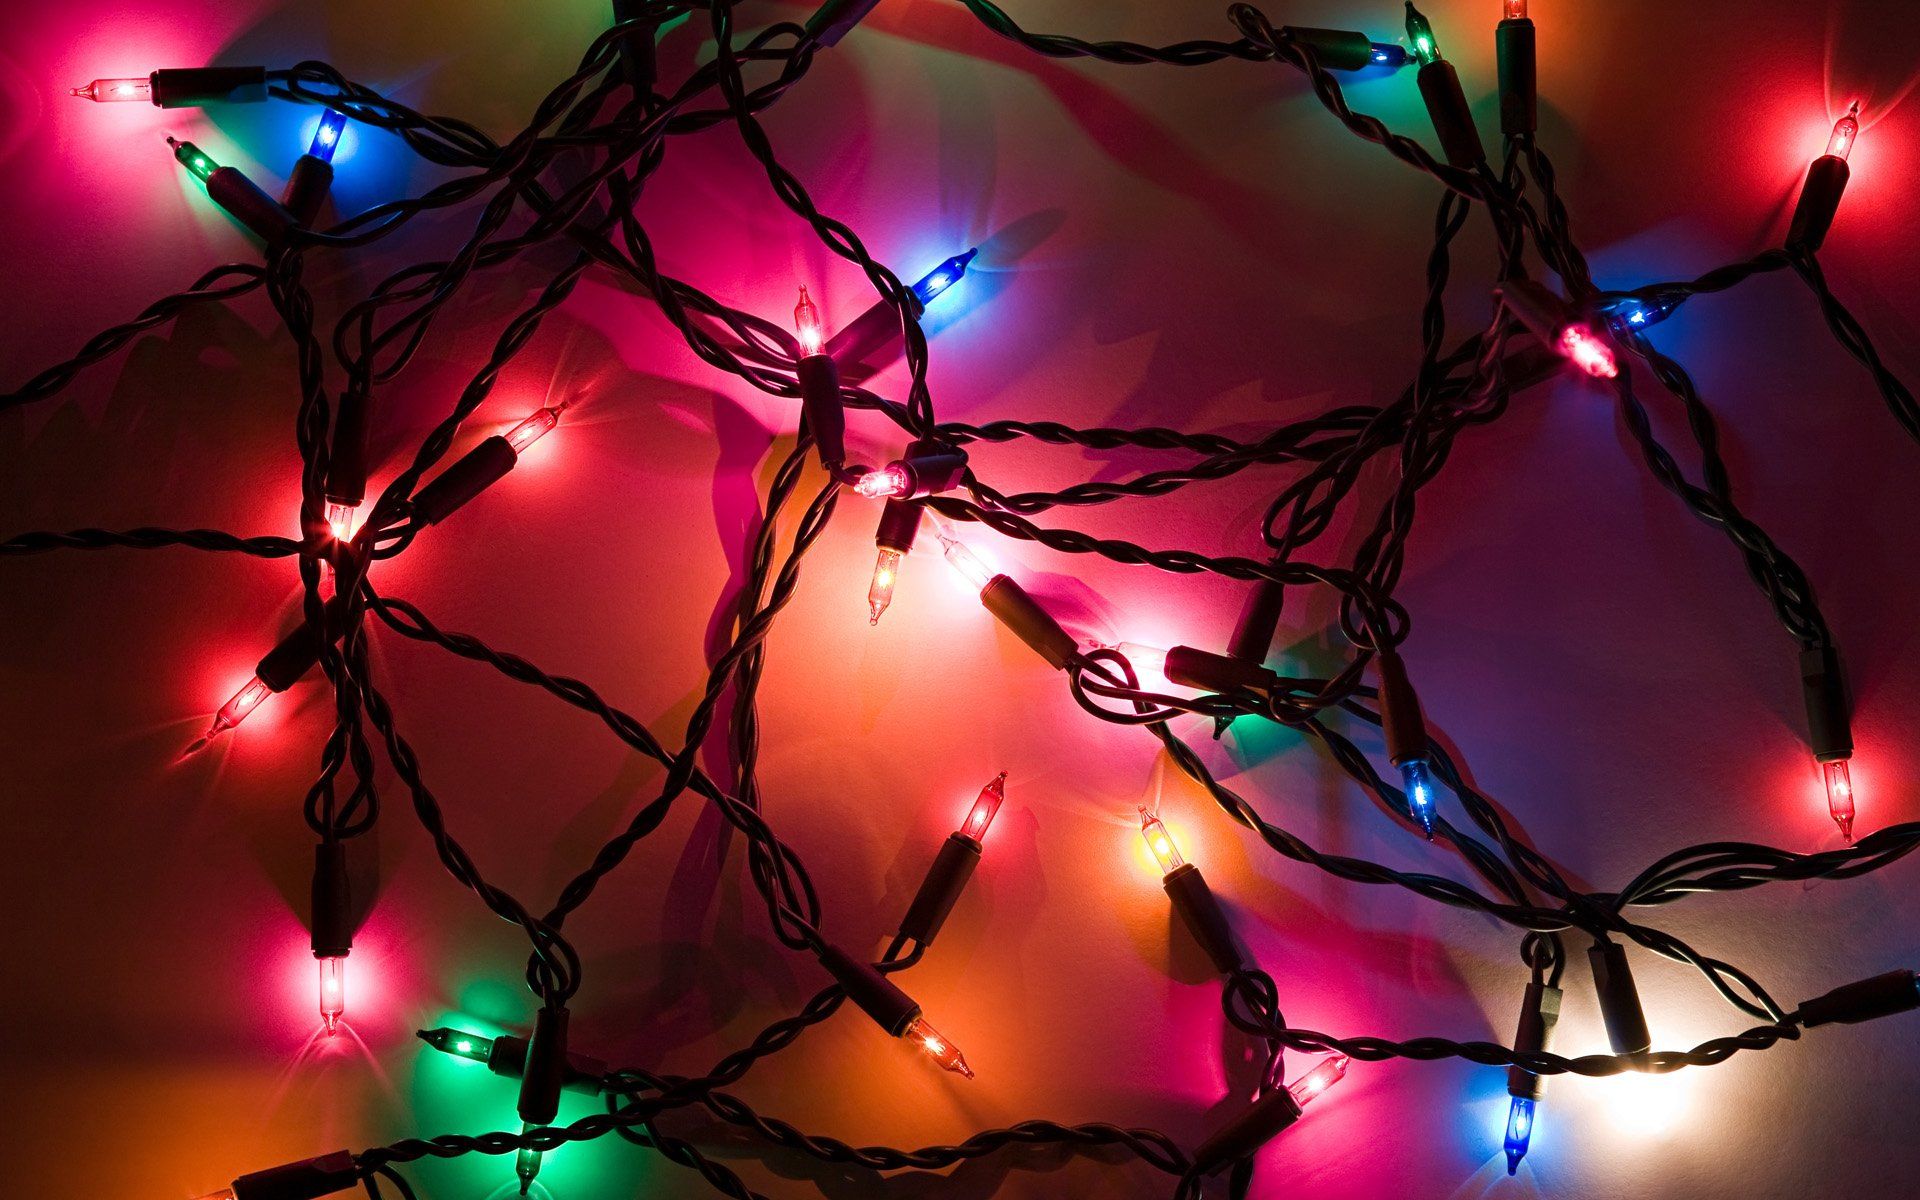 A string of Christmas lights with red, green, blue, and pink lights. - Christmas lights